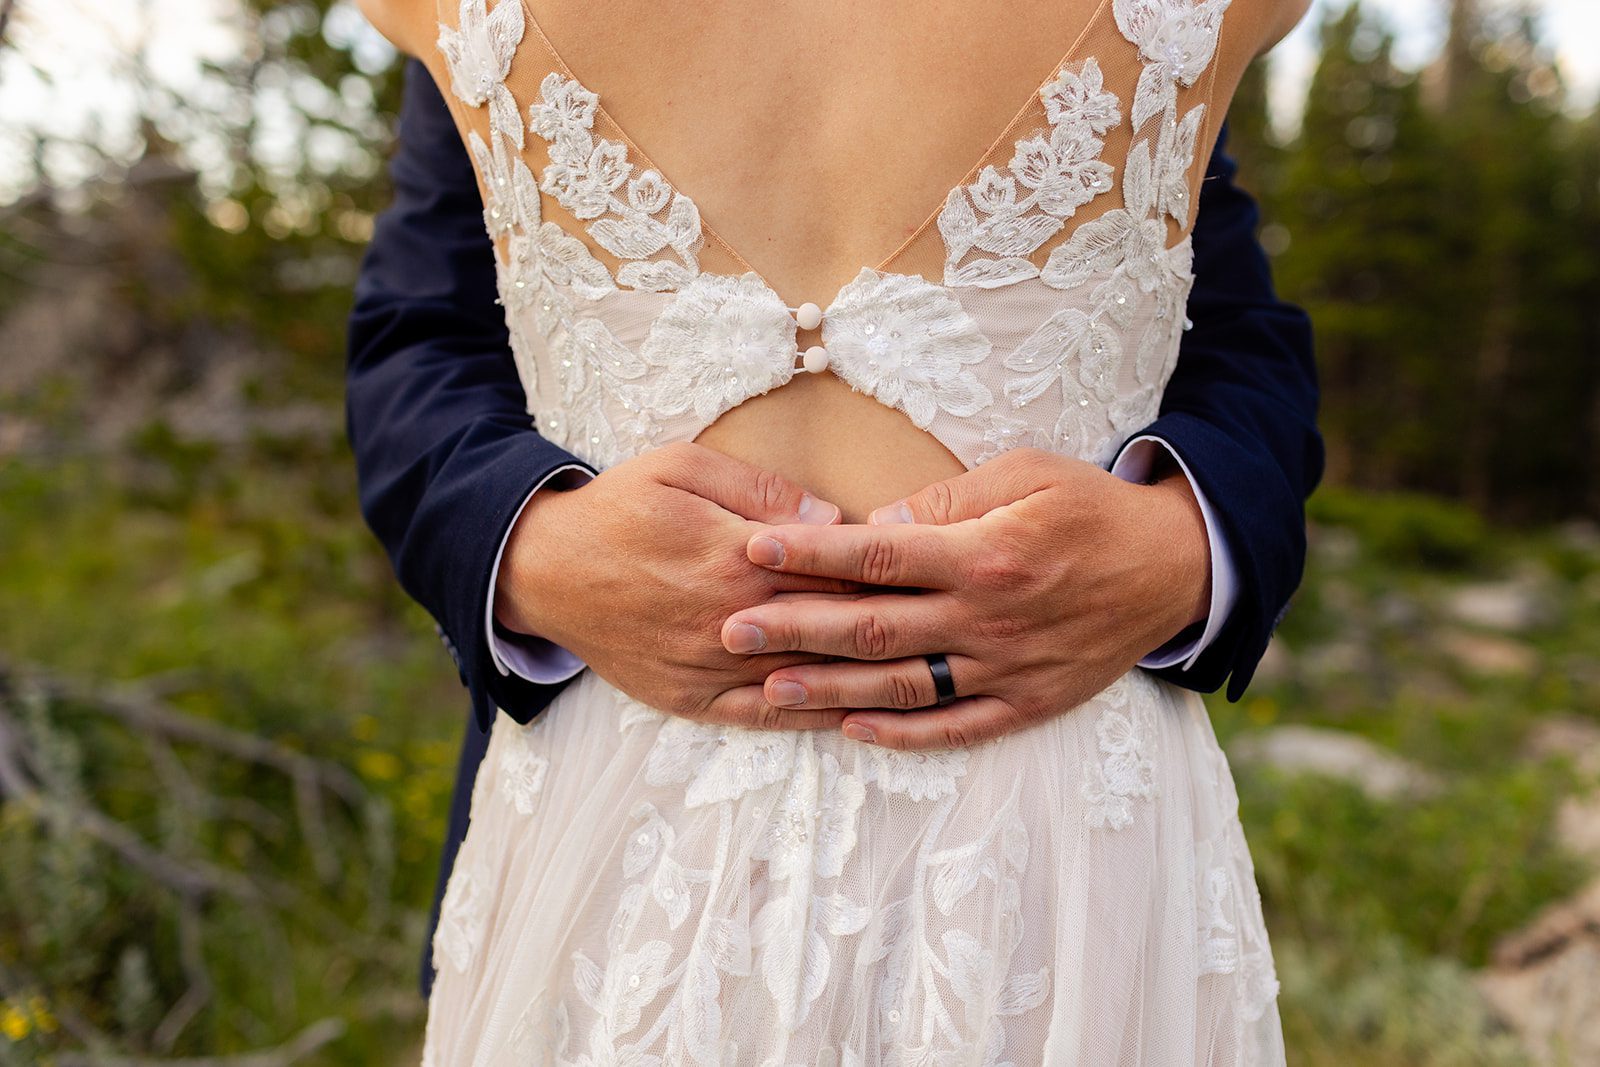 Groom wraps arms around bride in white dress